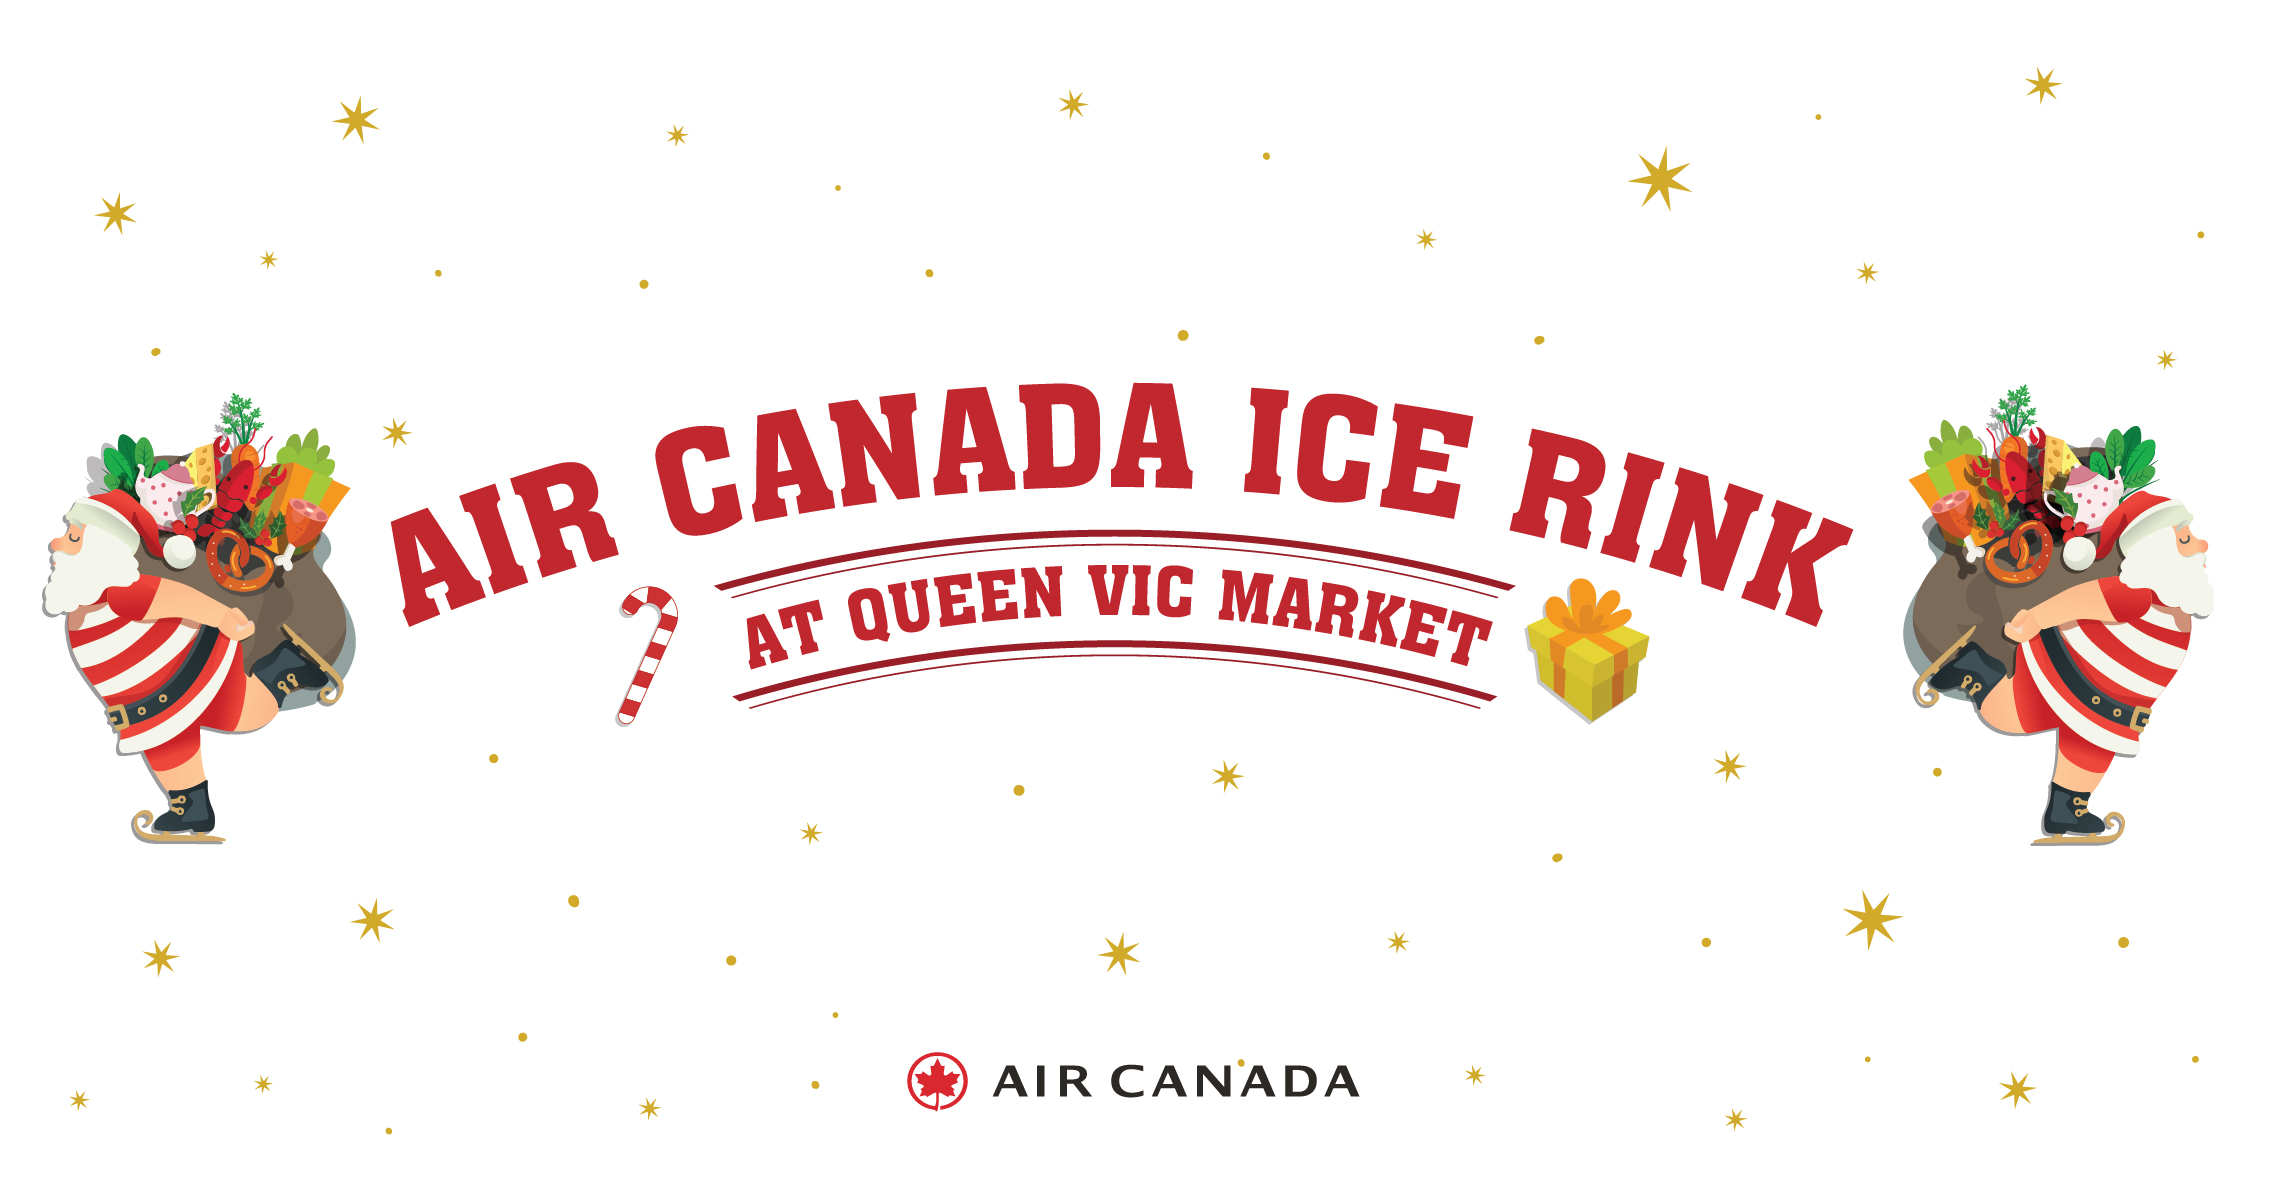 Air Canada Ice Rink Queen Vic Market